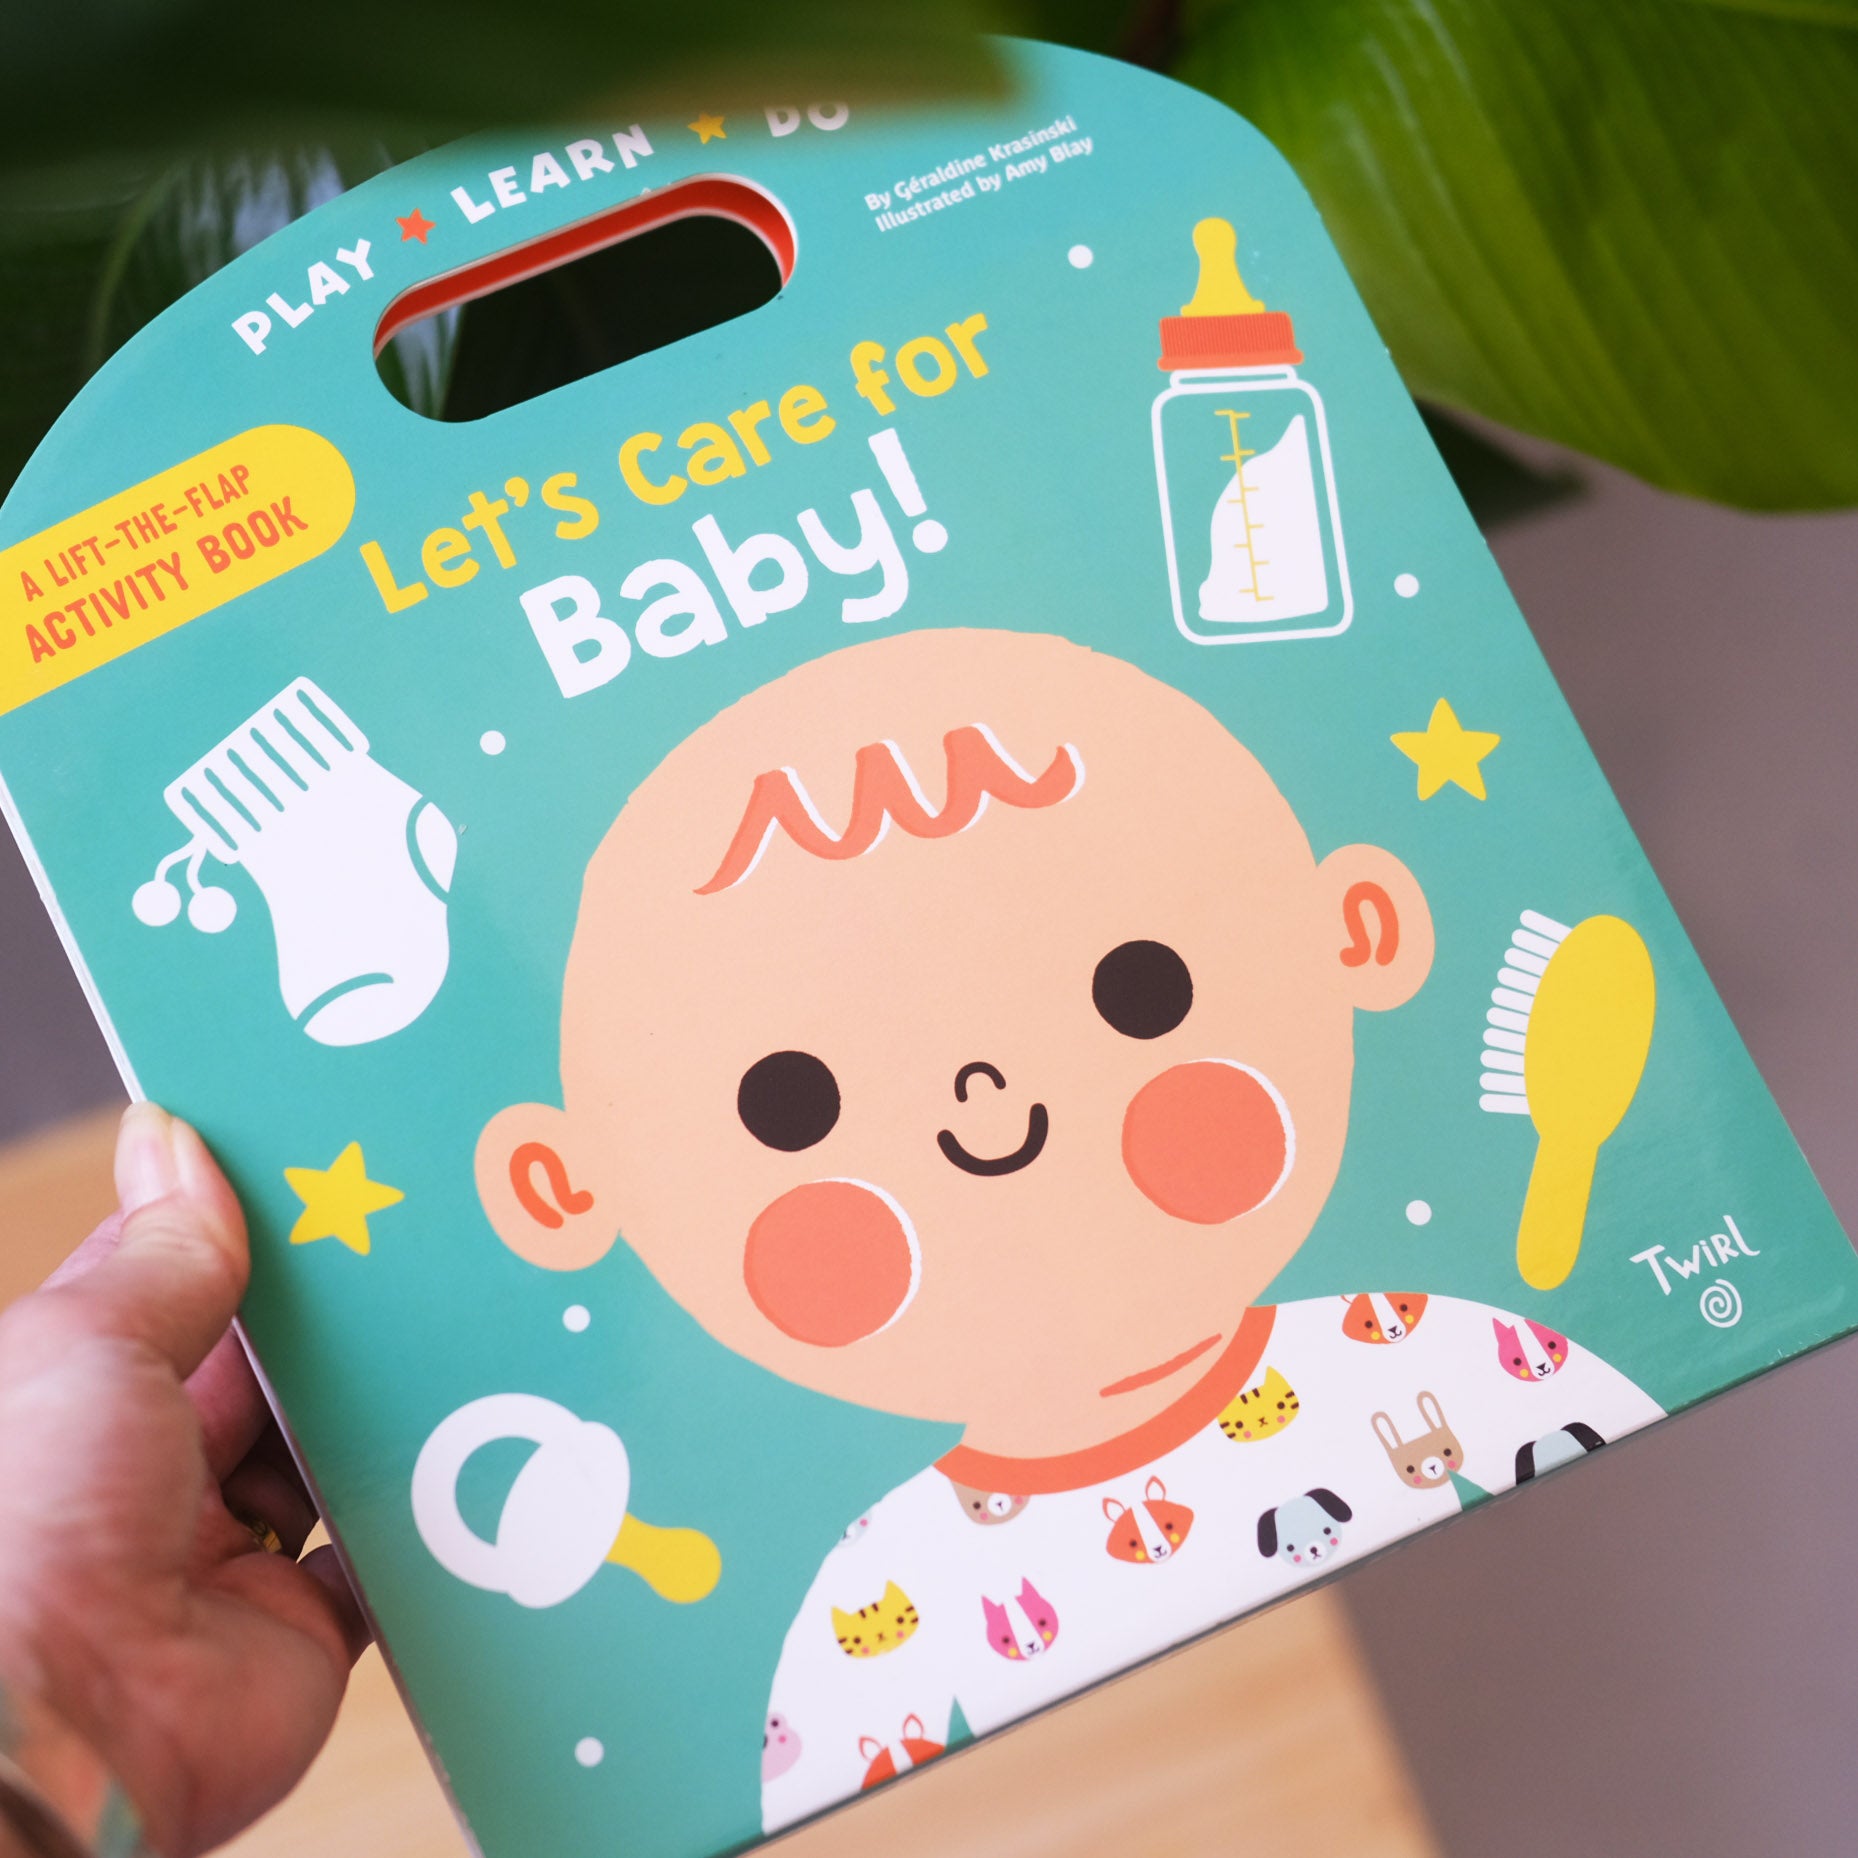 Let's Care for Baby! (Novelty Book)